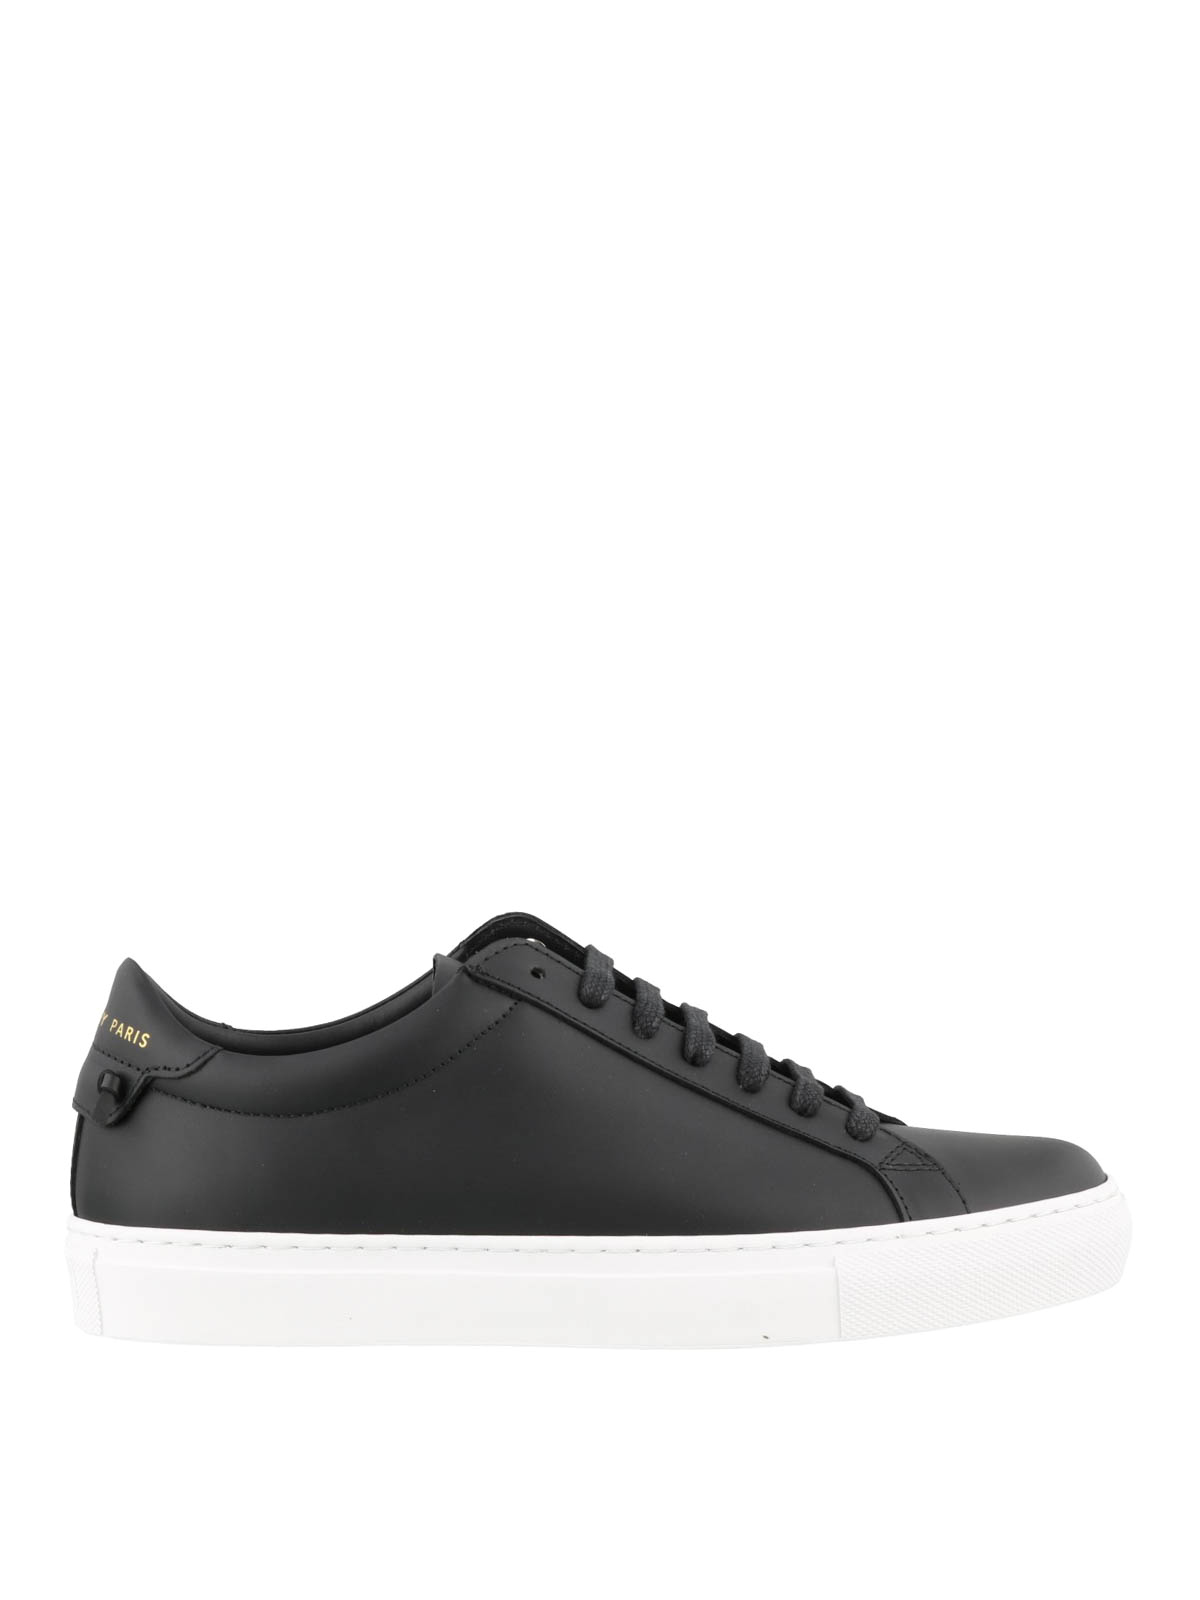 mens black givenchy trainers